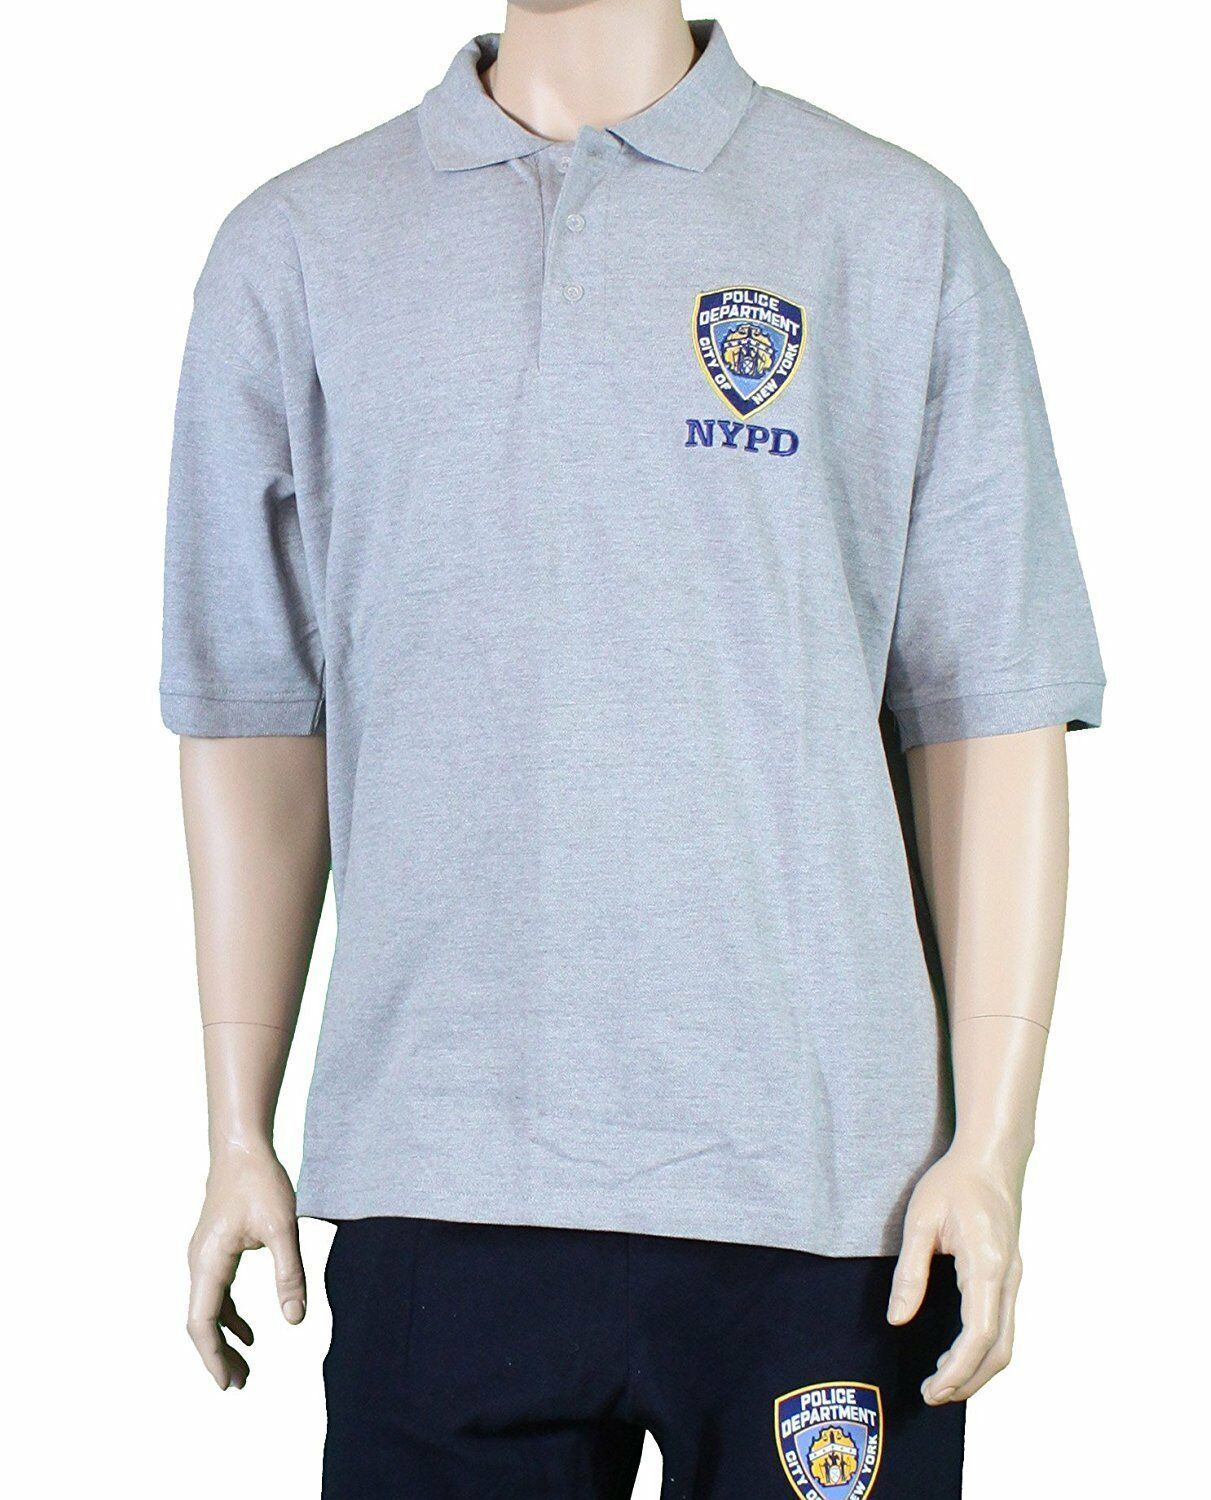 NYPD Official Embroidered Logo Polo Shirt Gray - $28.74